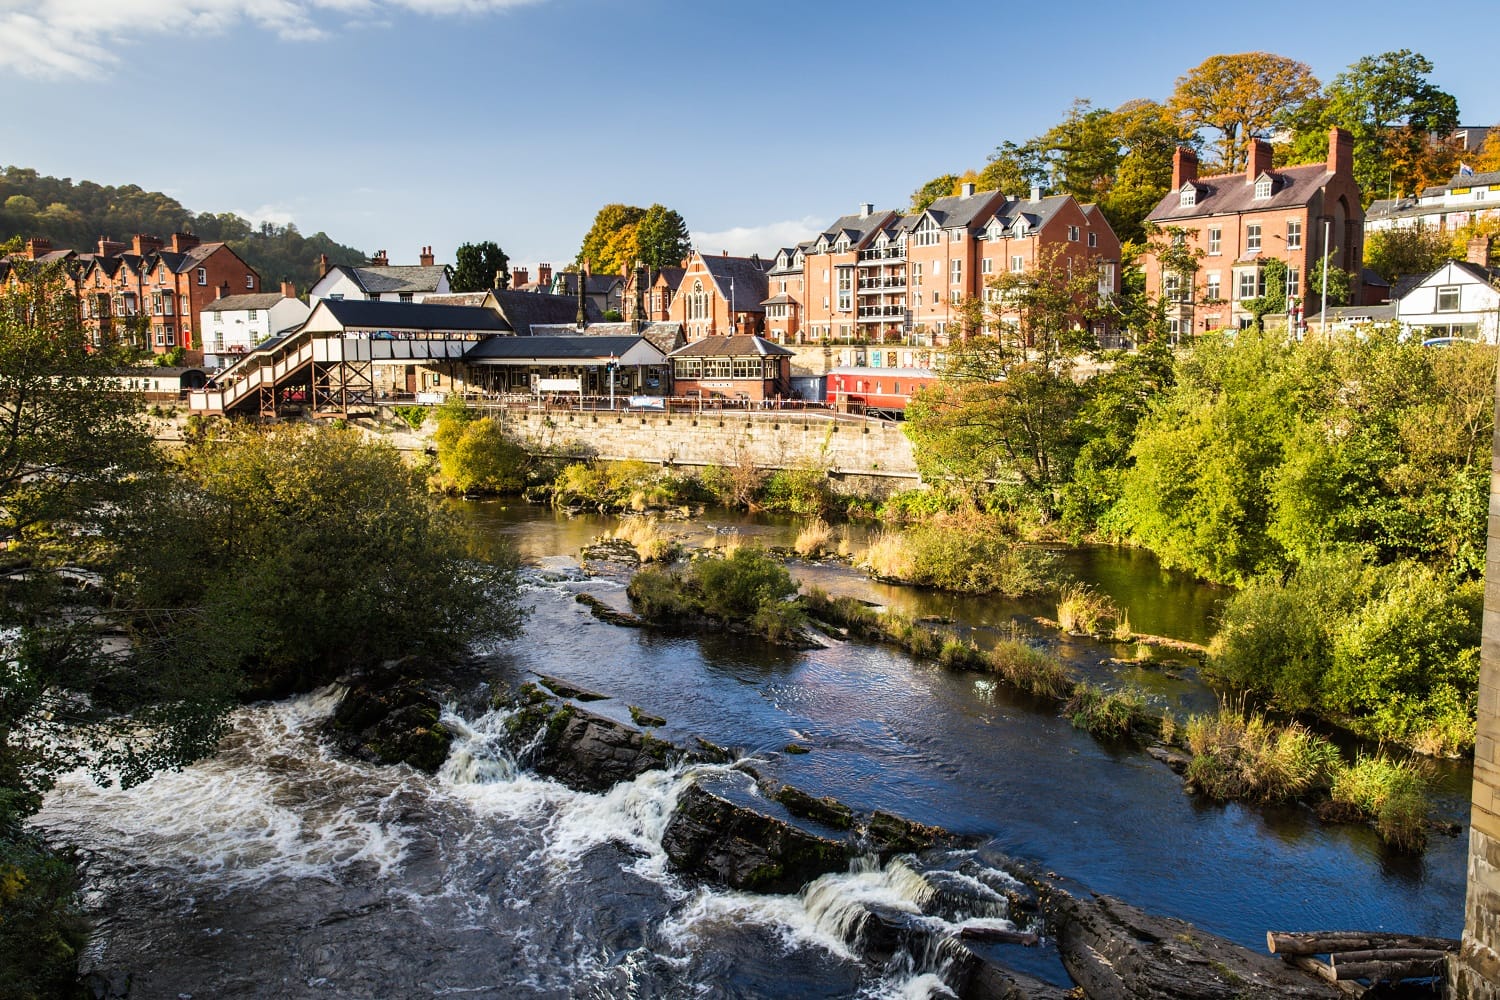 view of the river at Llangollen in Wales